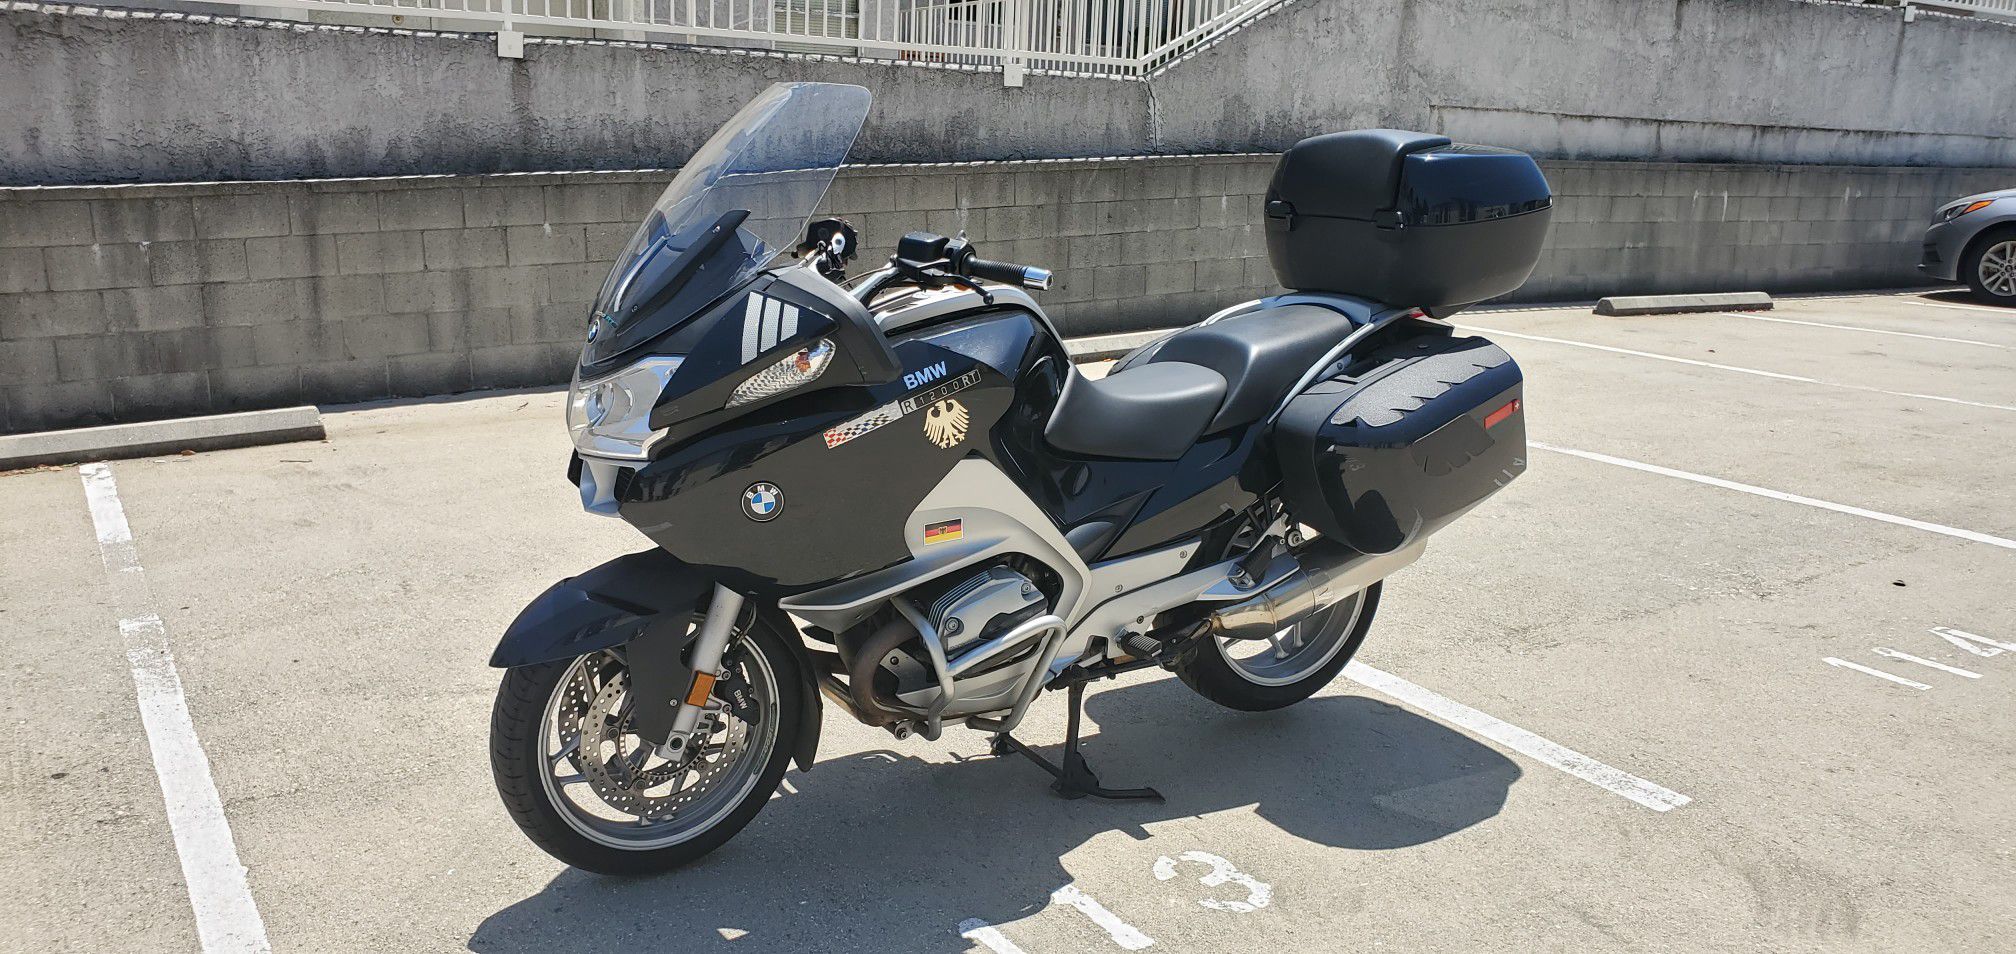 BMW MOTORCYCLE R 1200 RT